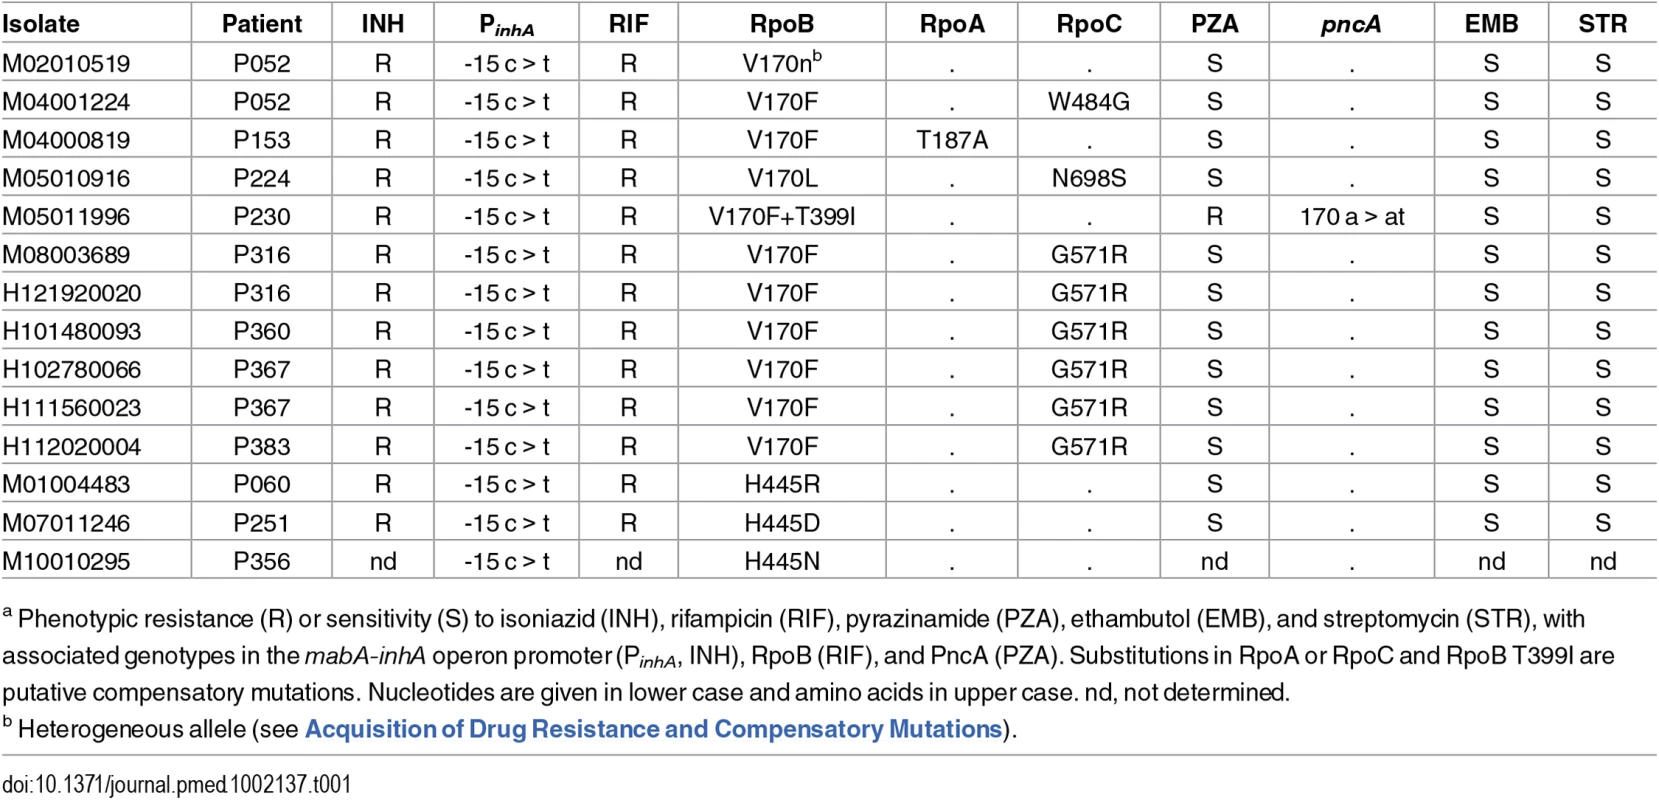 Drug resistance and compensatory mutations in poly-resistant isolates<em class=&quot;ref&quot;><sup>a</sup></em>.